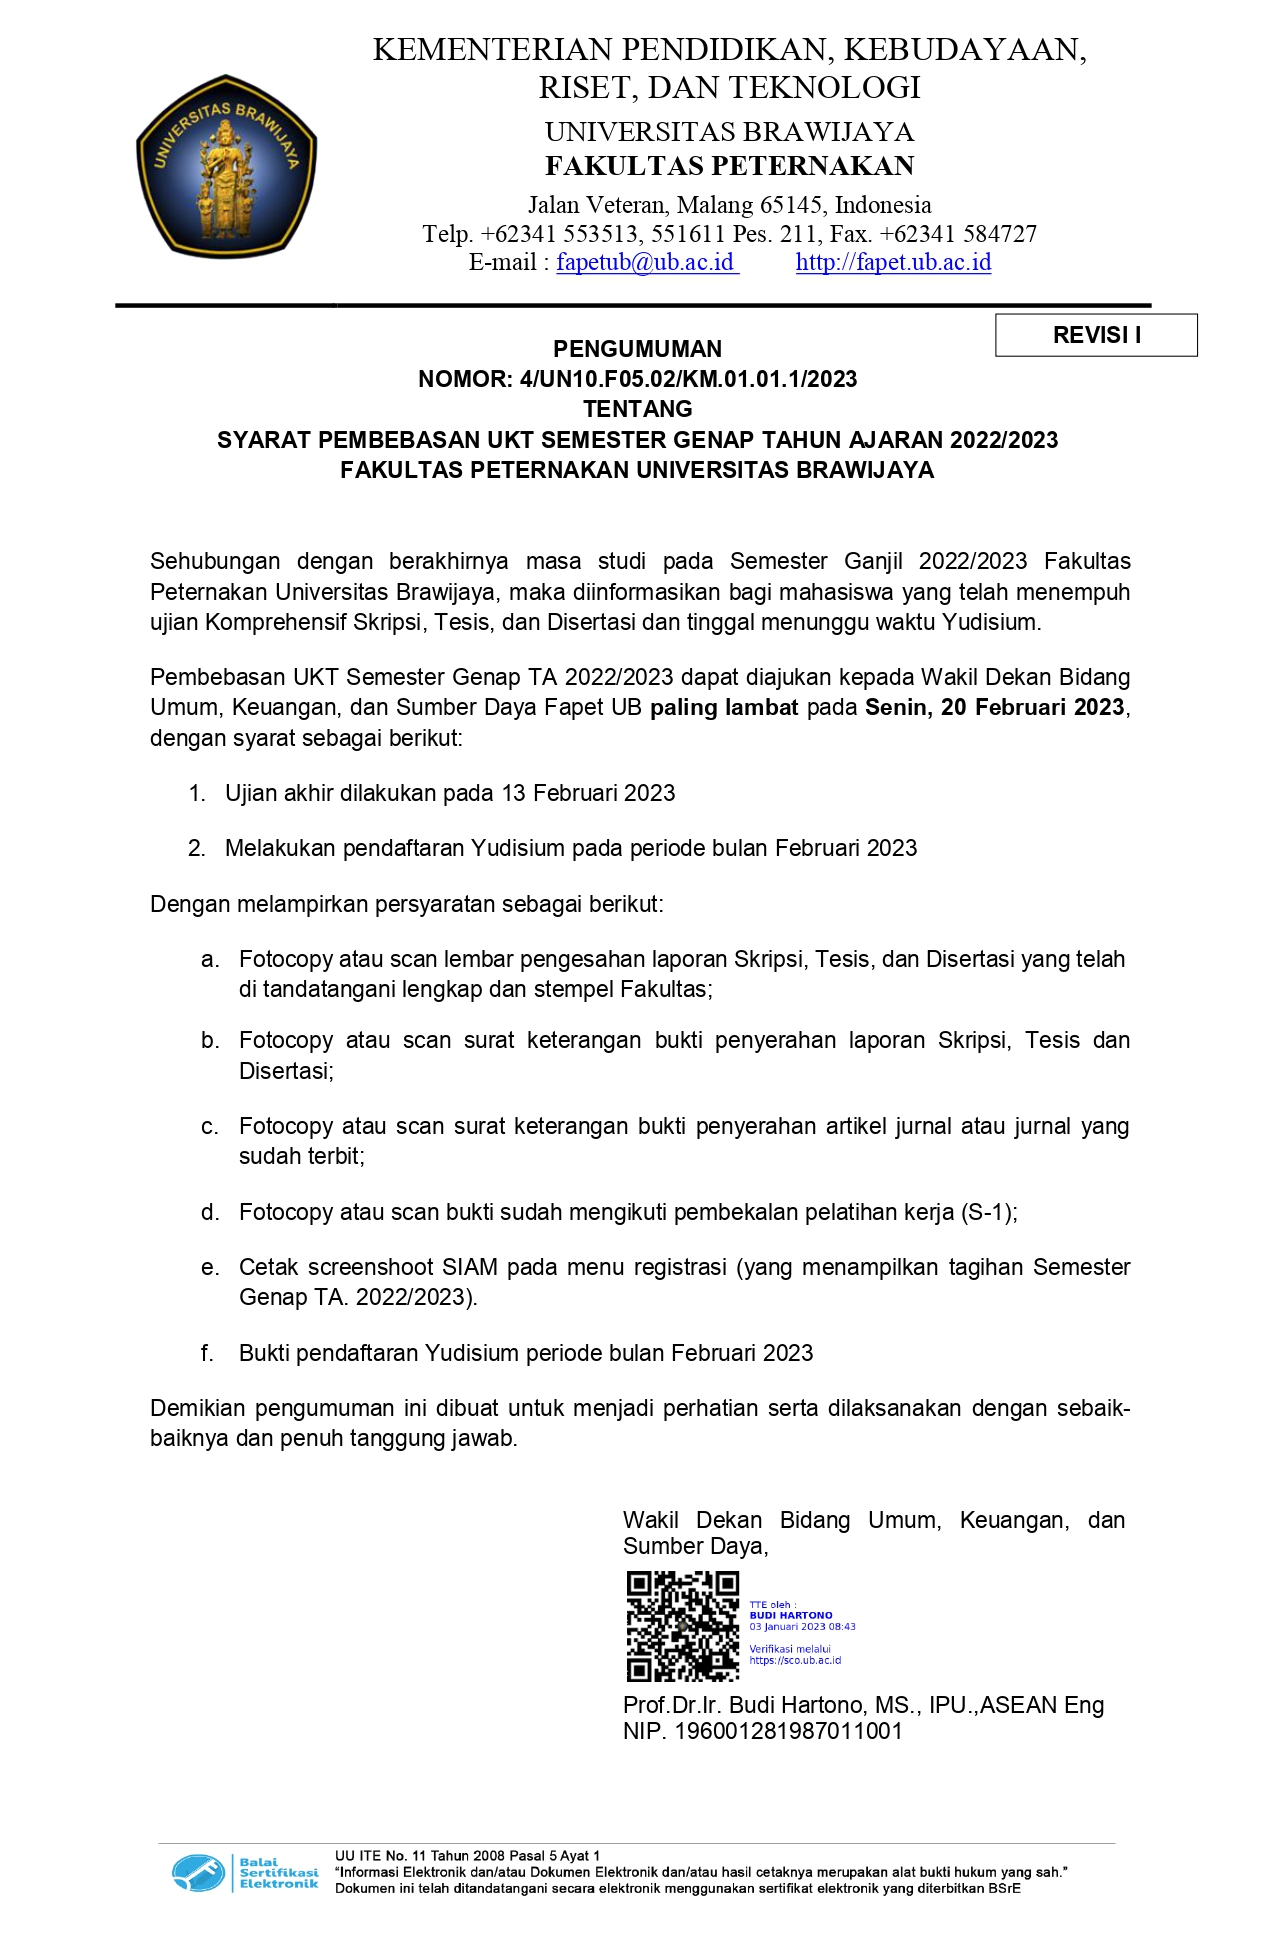 [REVISION] Exemption Requirements for Even Semester UKT 2022/2023